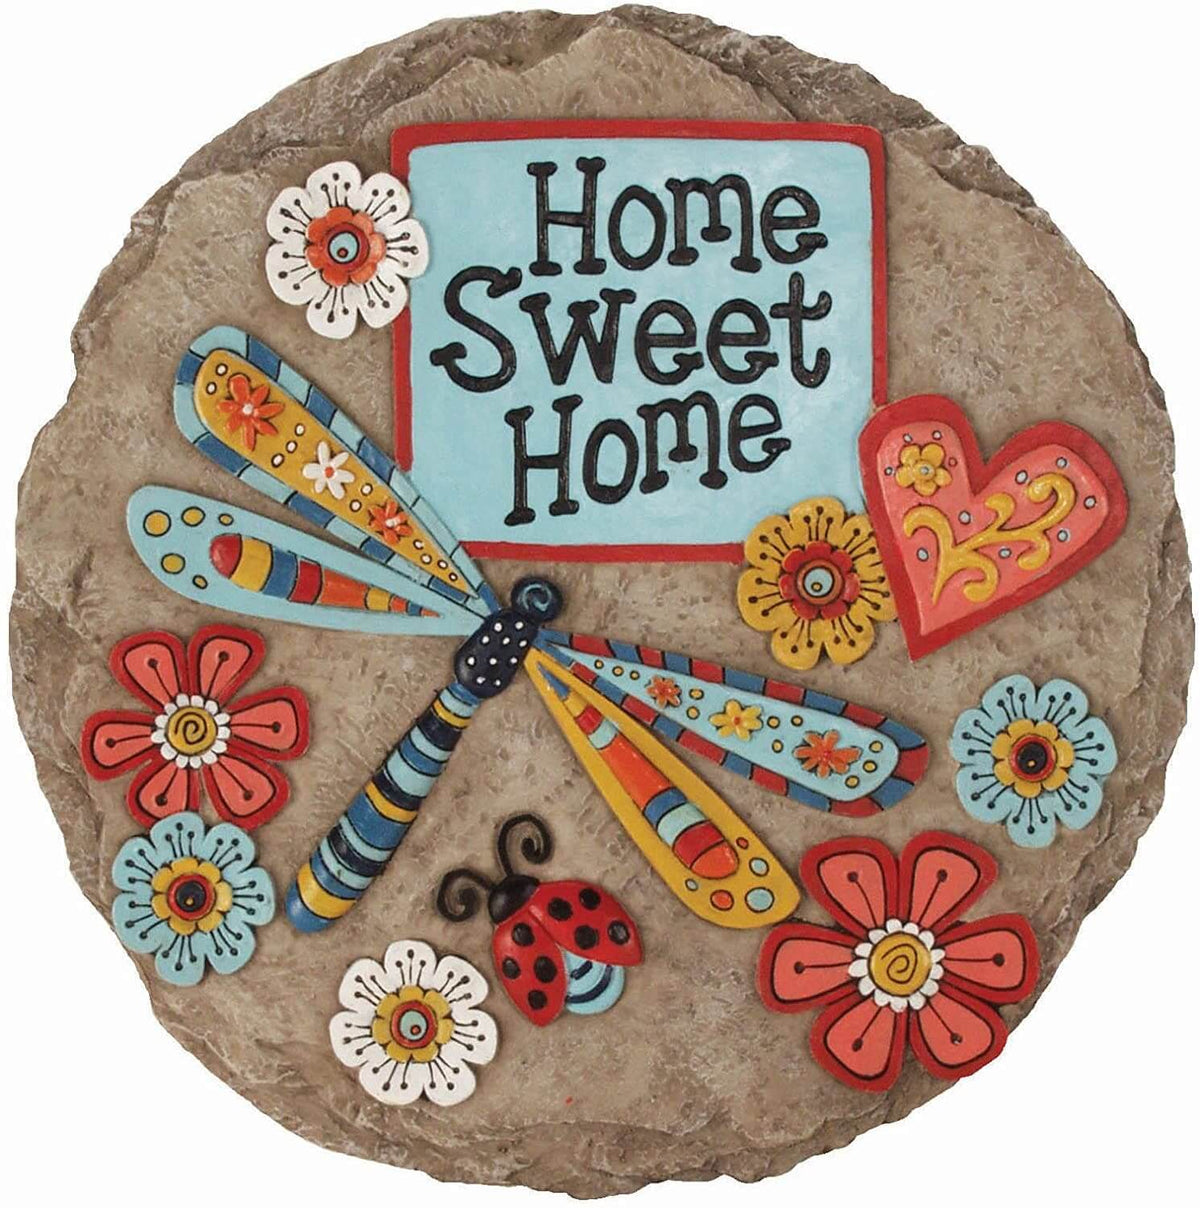 Home Sweet Home Dragonfly Decorative Garden Stone